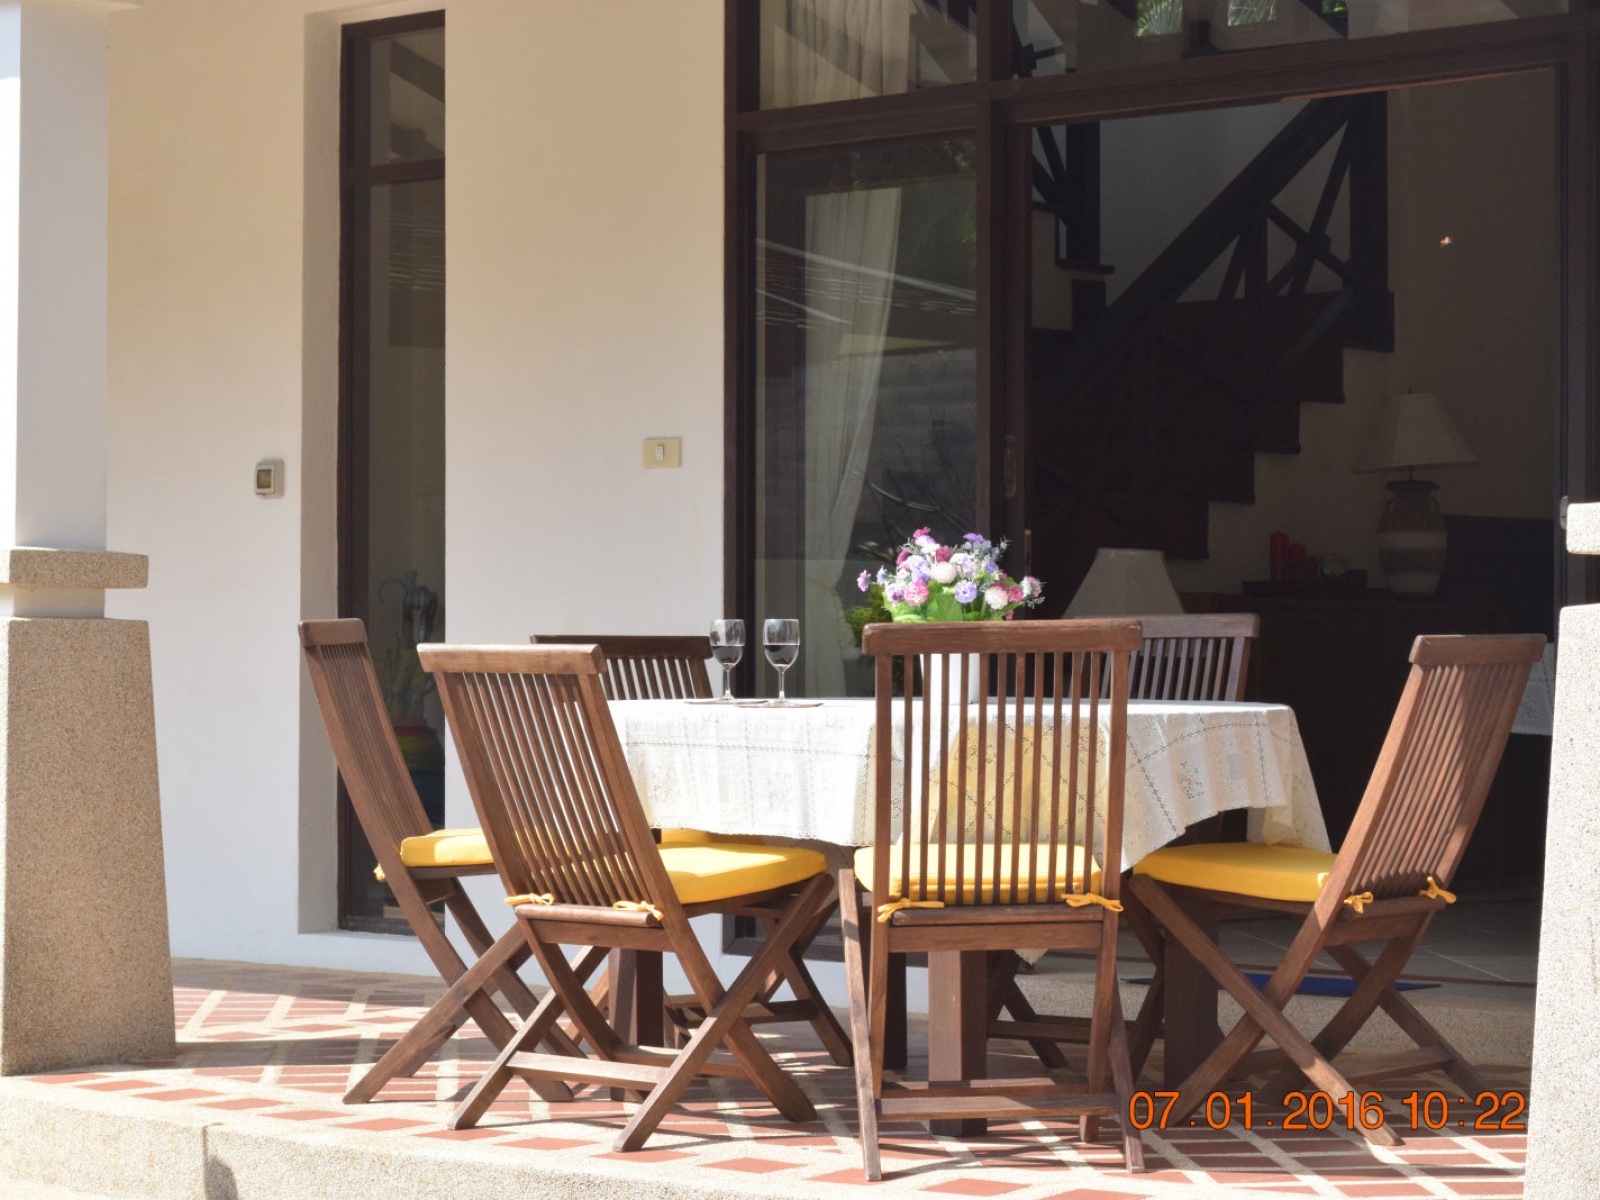 P11 Coconut Paradise Balinese Style 3 Bedroom Villa with Private Pool within a walled garden